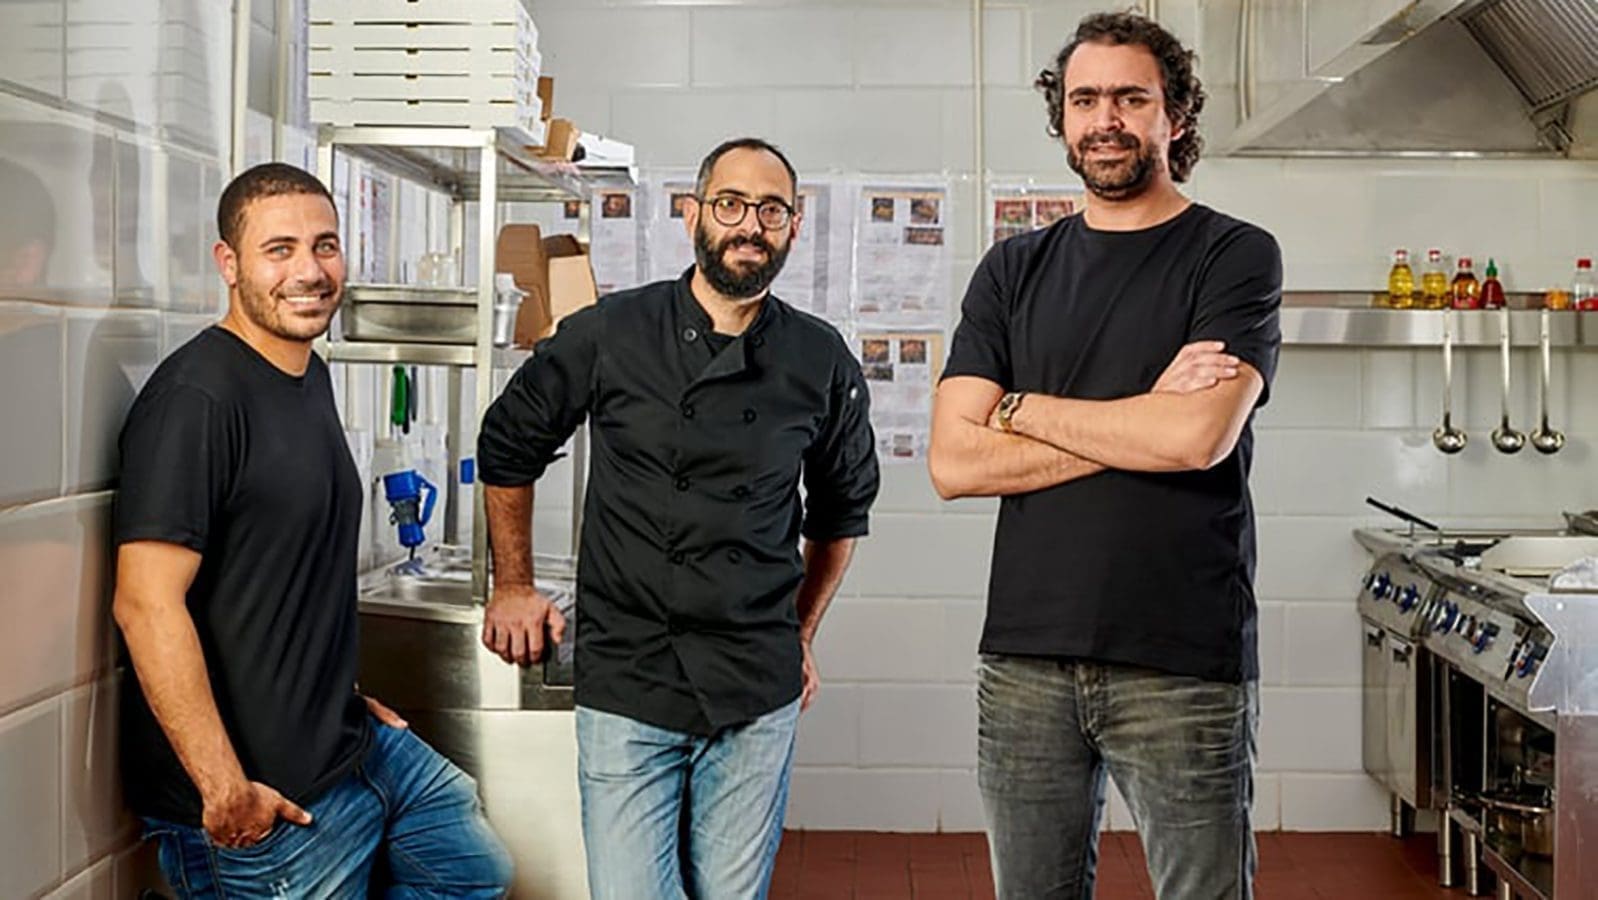 Egyptian cloud kitchen operator The Food Lab raises US$4.5m in pre-seed funding